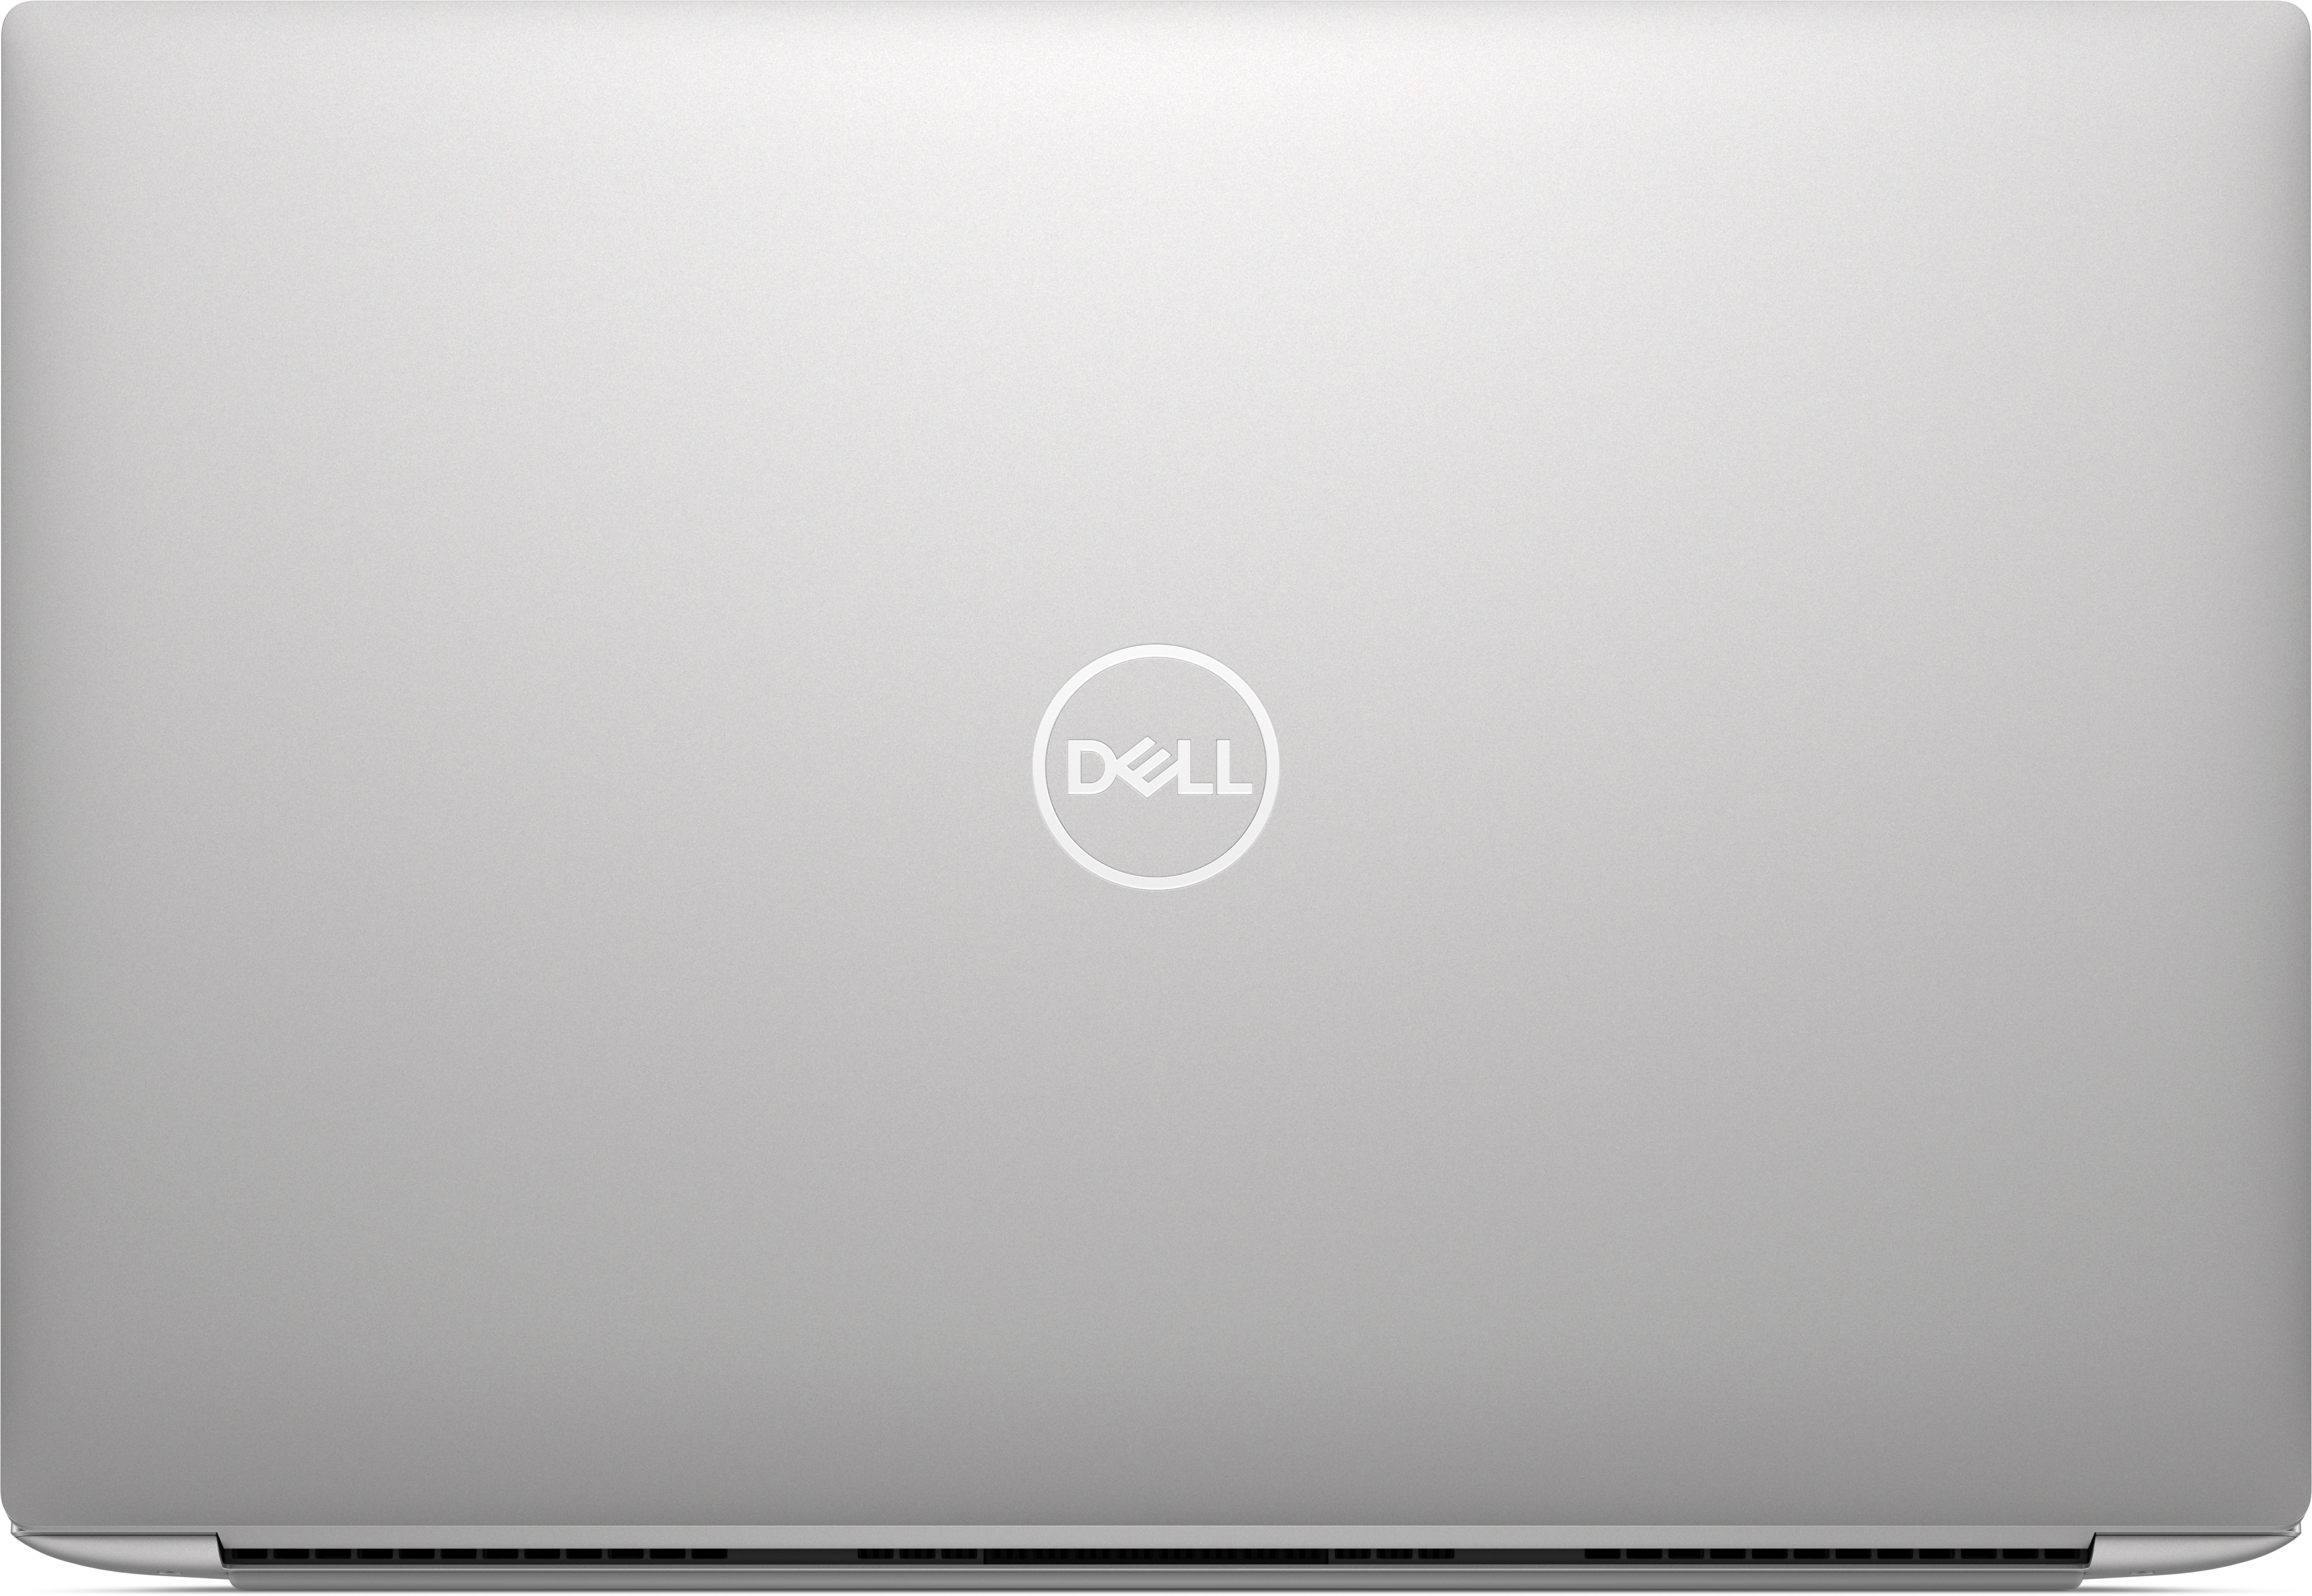 XPS 16 Laptop | Dell USA